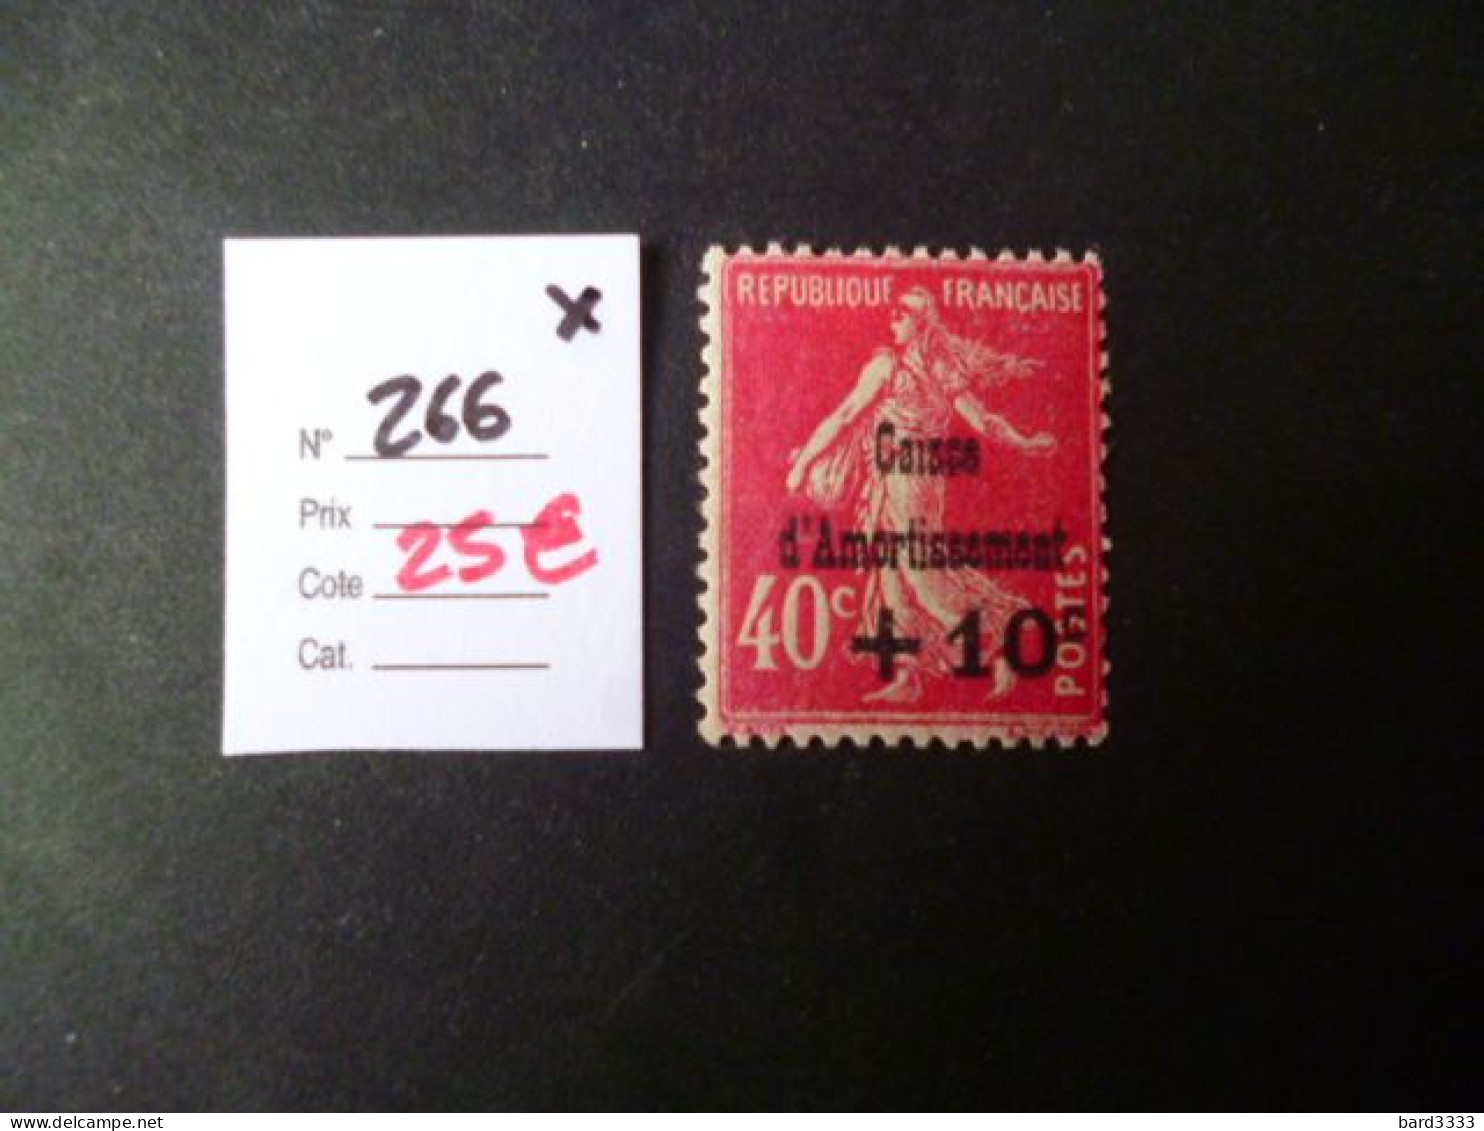 Timbre France Neuf * Caisse Amortissement N° 266 Cote 25  € - Neufs